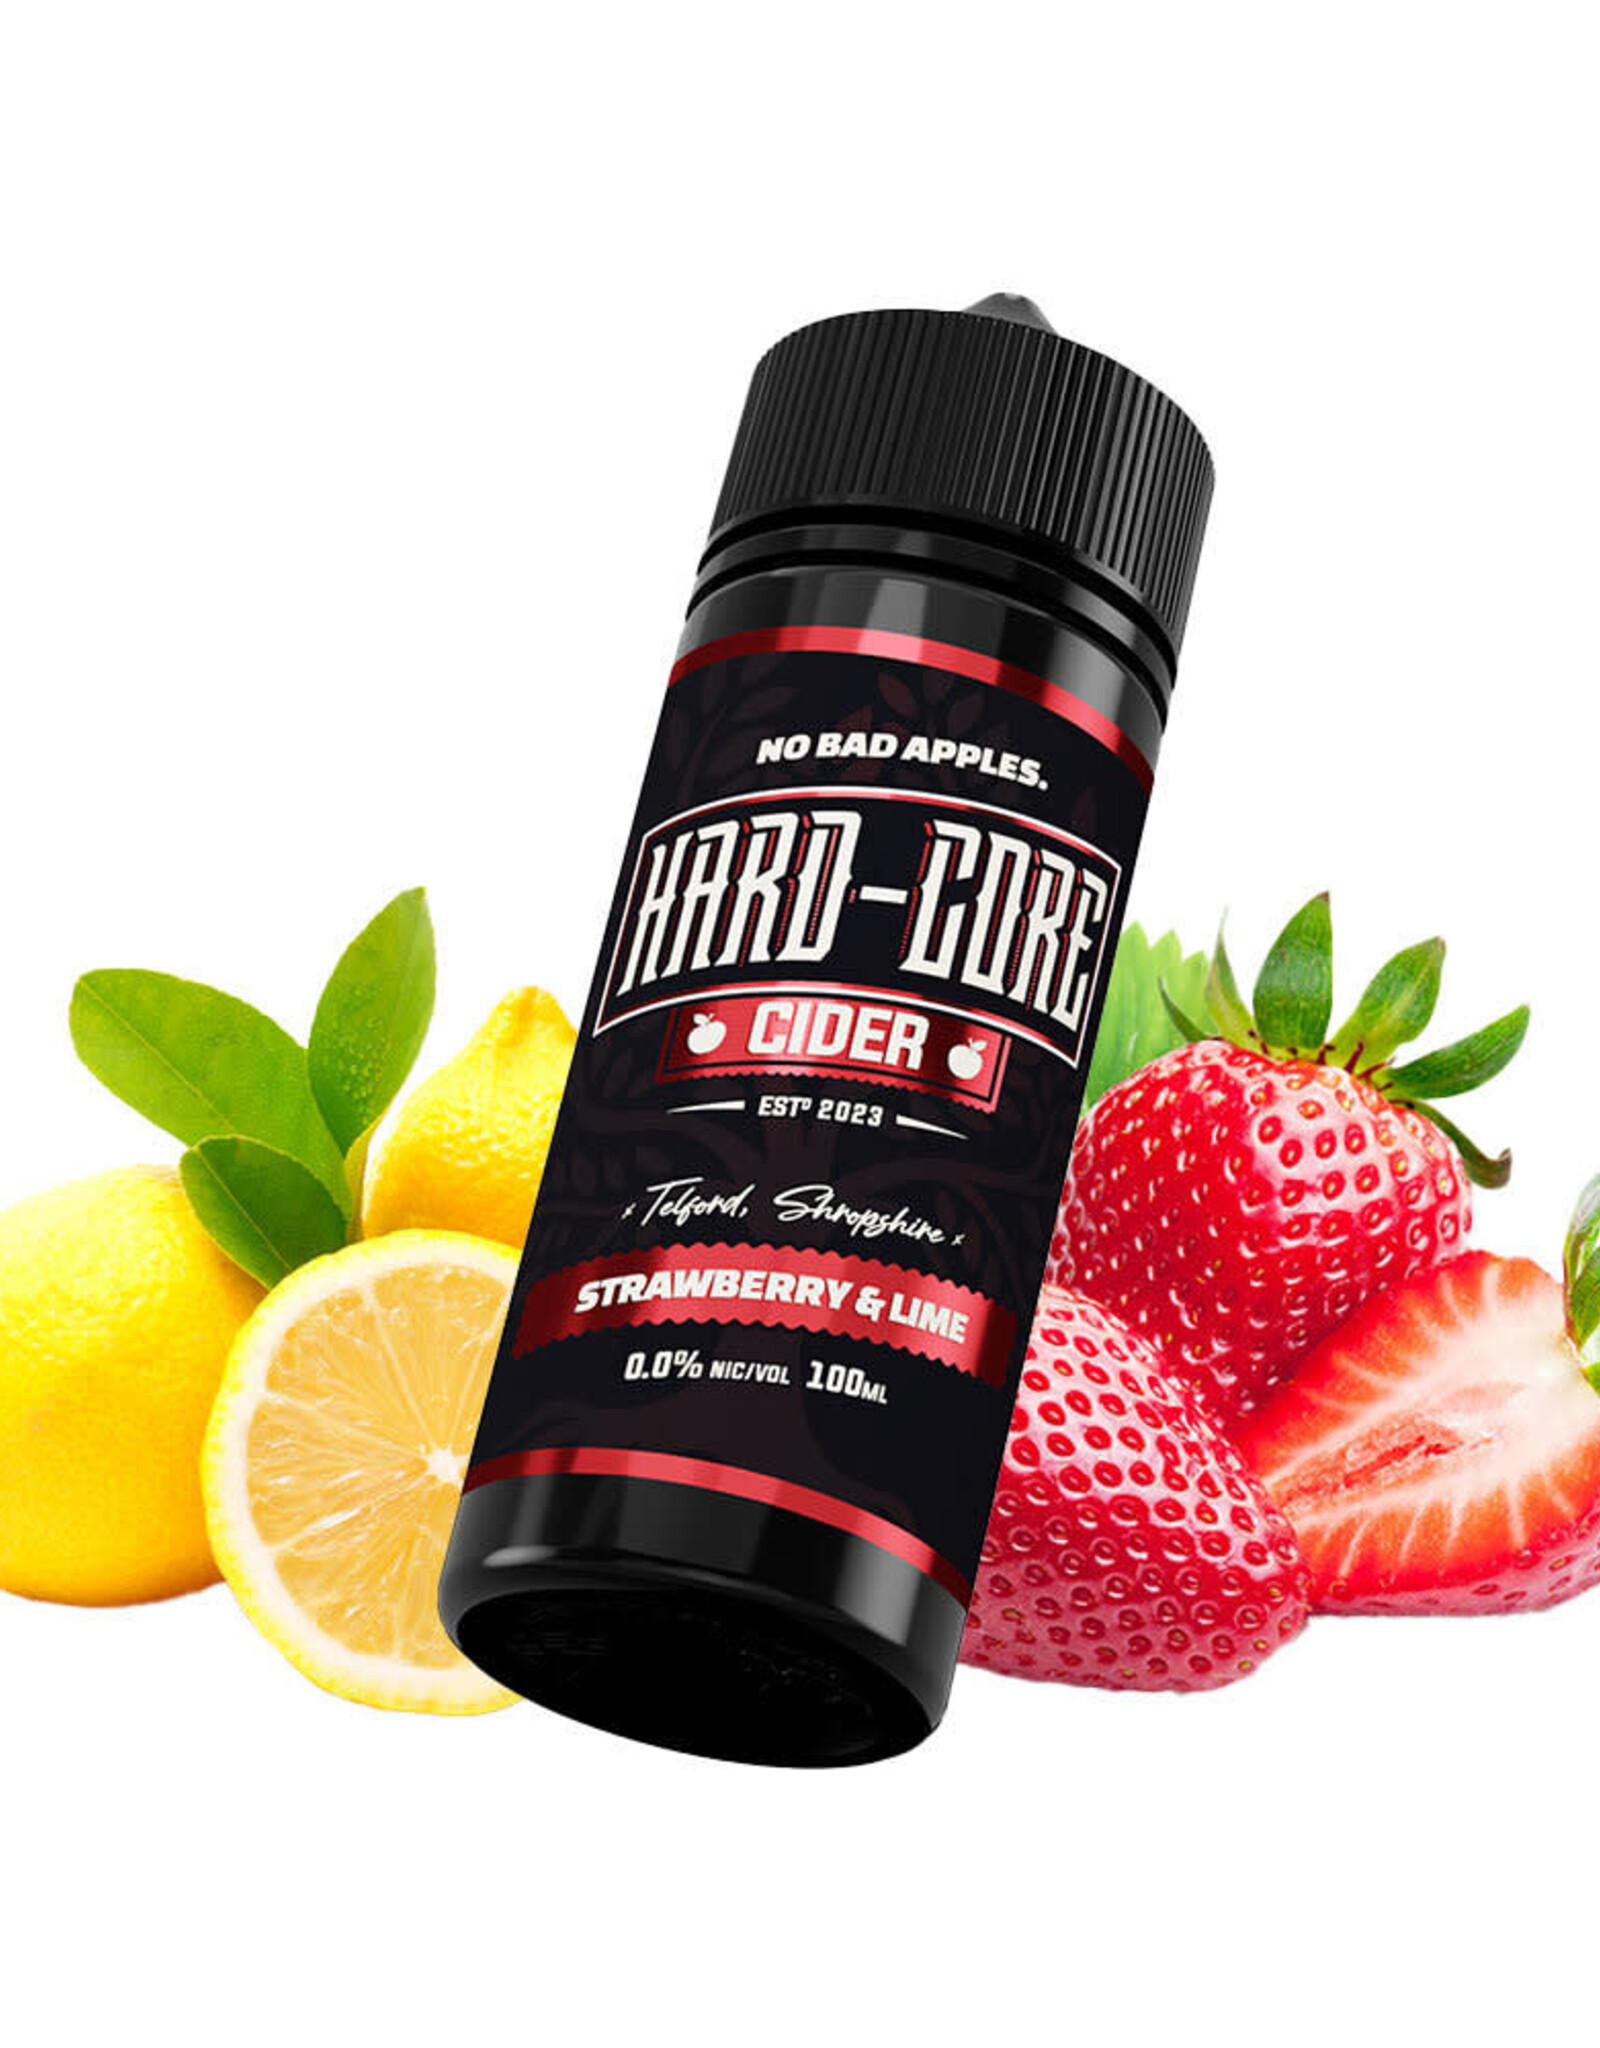 No Bad Apples Hard-Core Cider - Strawberry & Lime 100ml